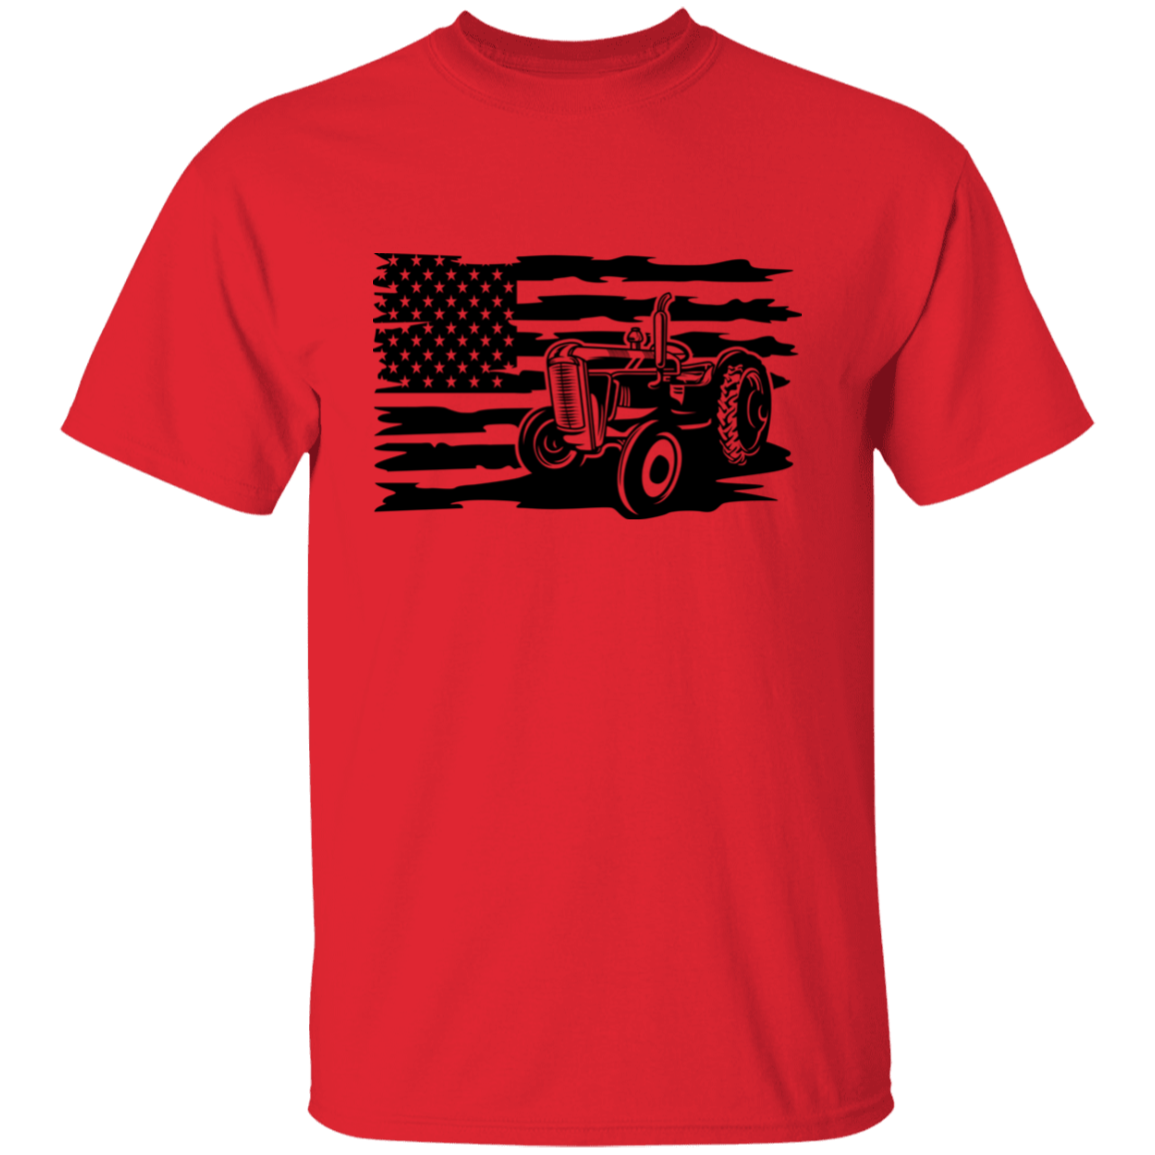 Tractor/Flag T-shirt